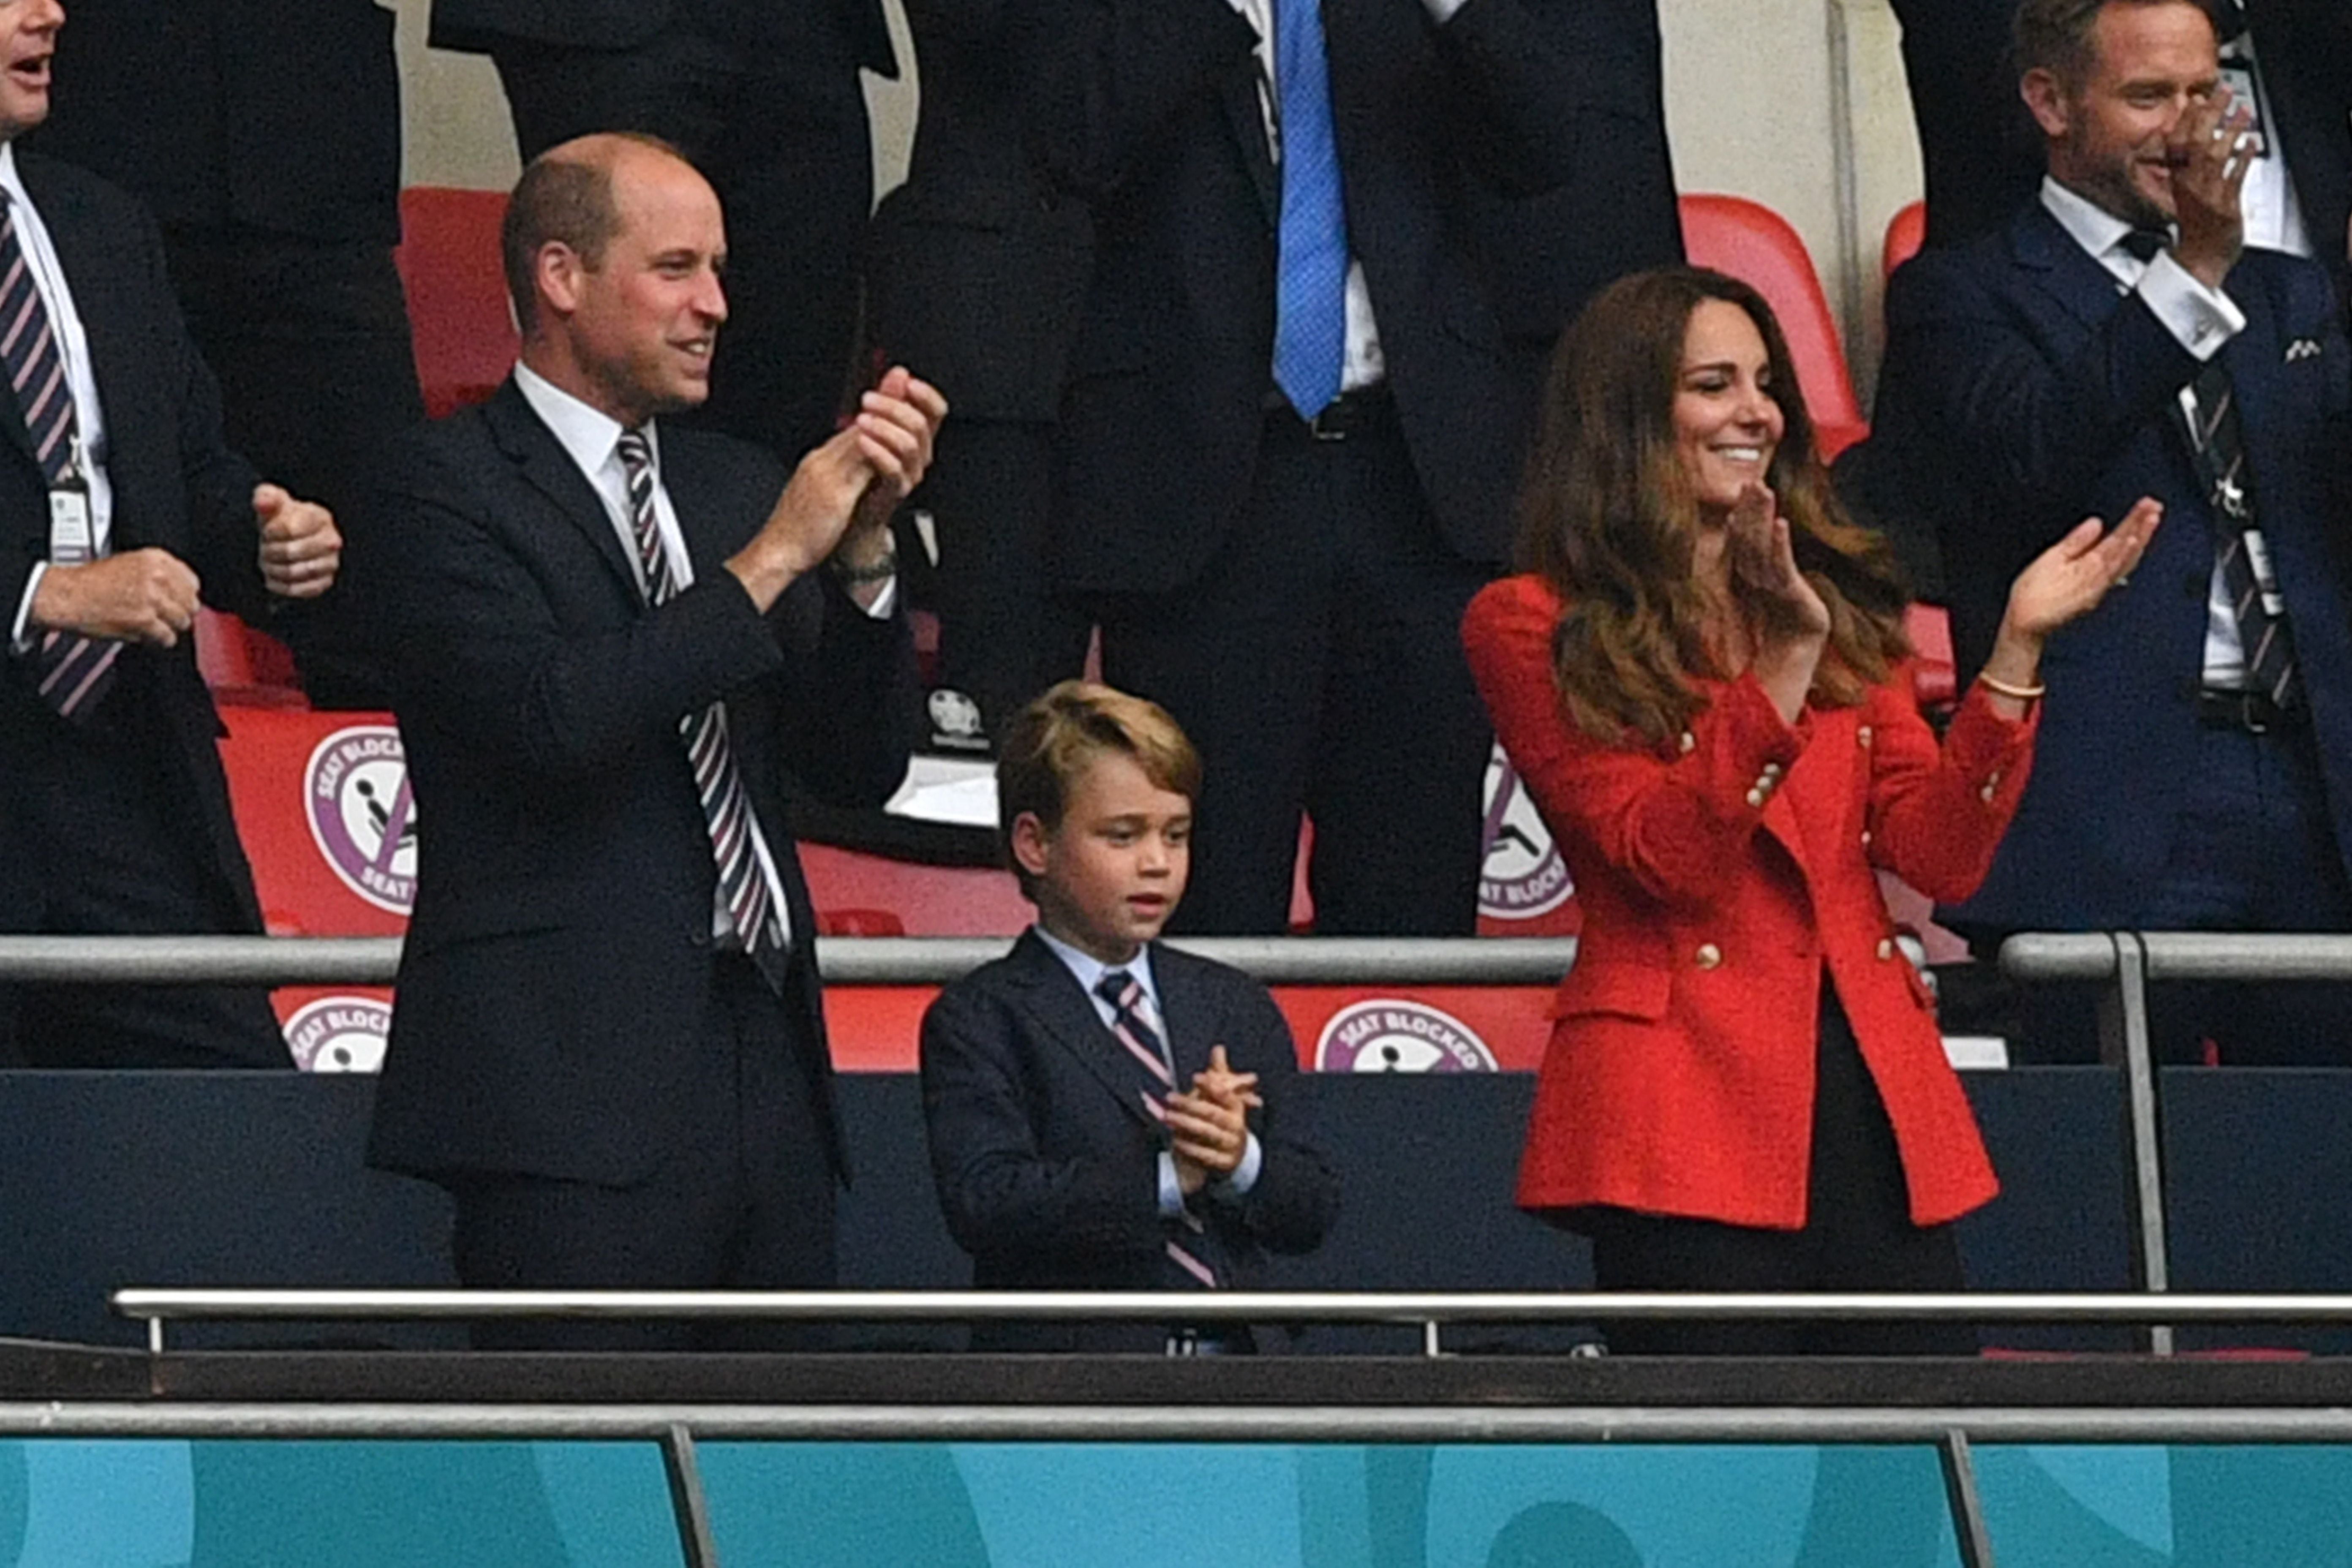 Prince William, Duke of Cambridge, Prince George of Cambridge, and Catherine, Duchess of Cambridge, celebrate the first goal